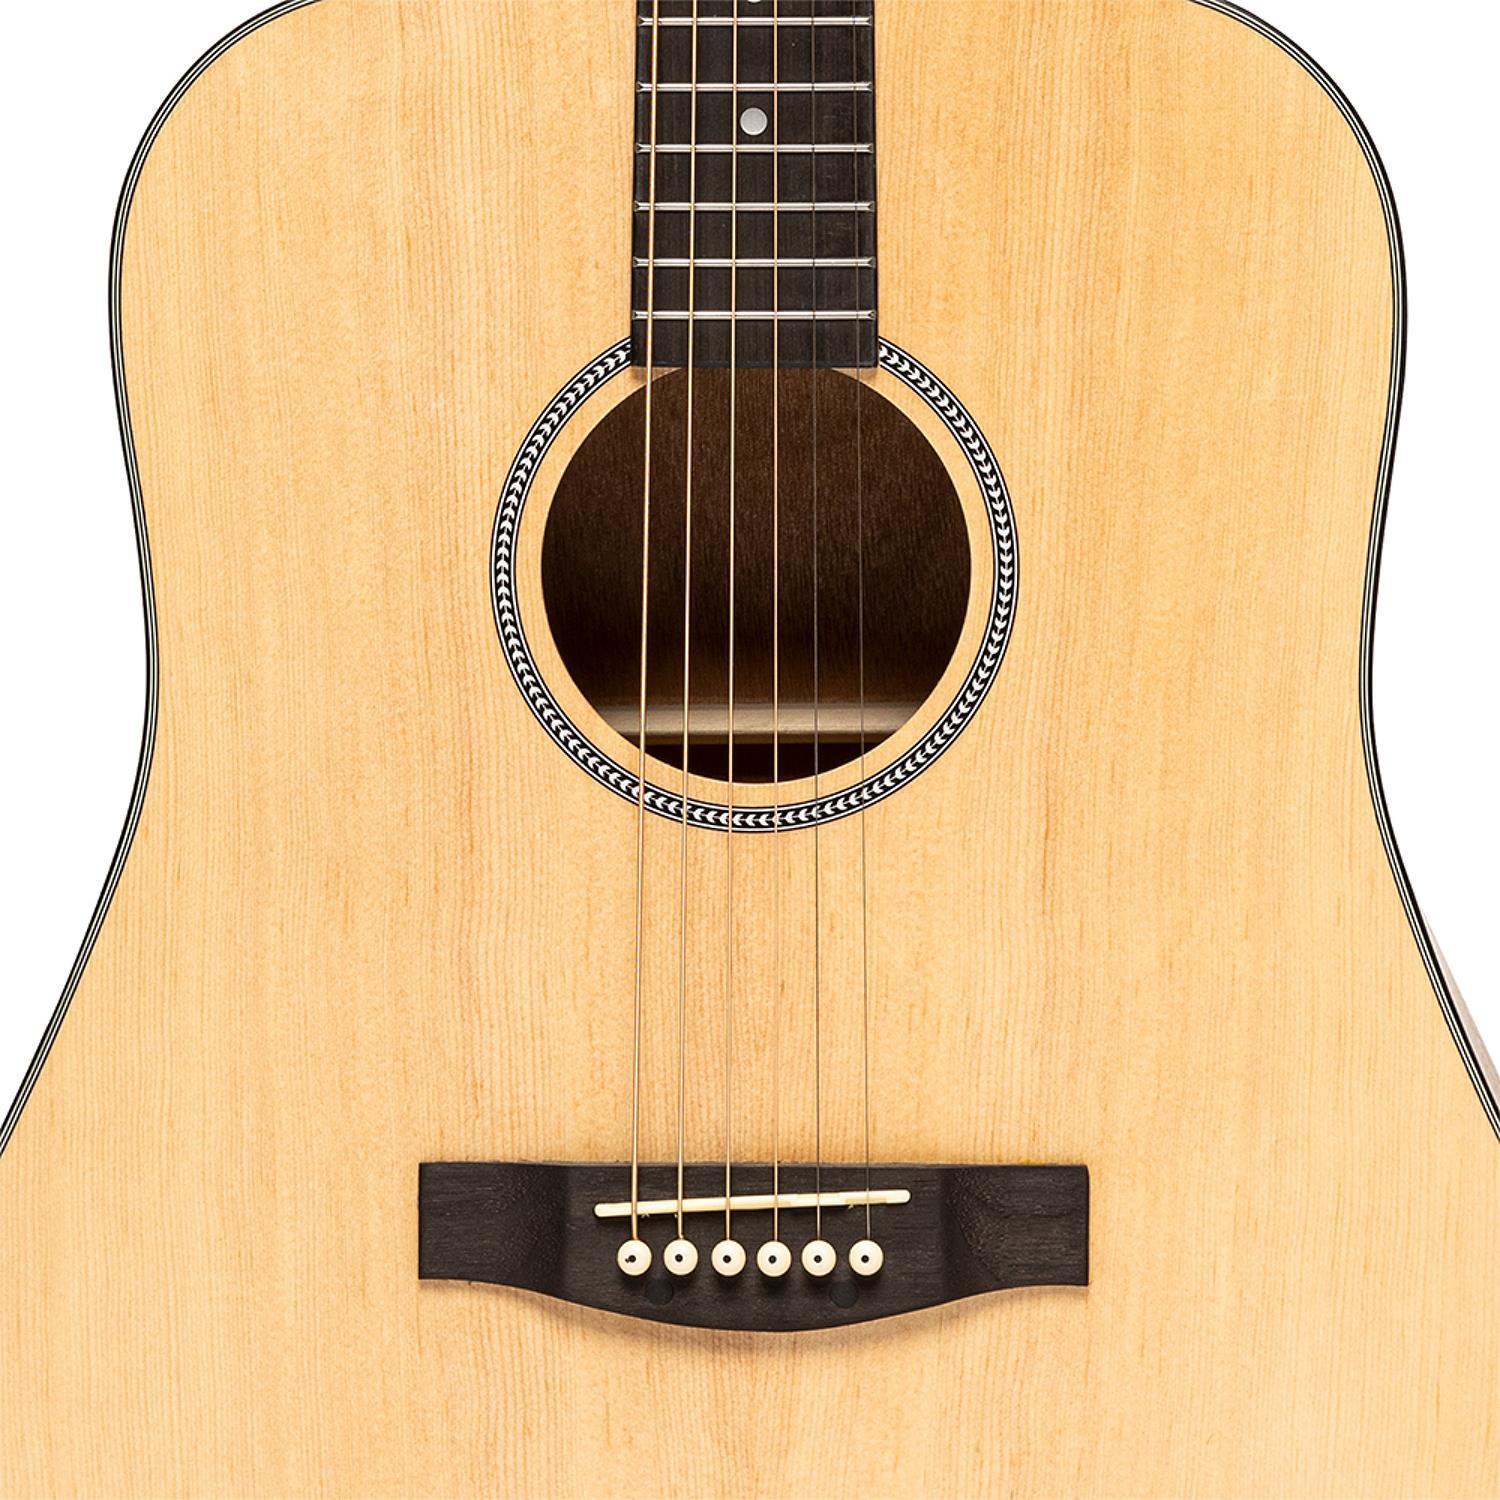 Stagg SA25 D Spruce Acoustic Dreadnought Guitar - DY Pro Audio